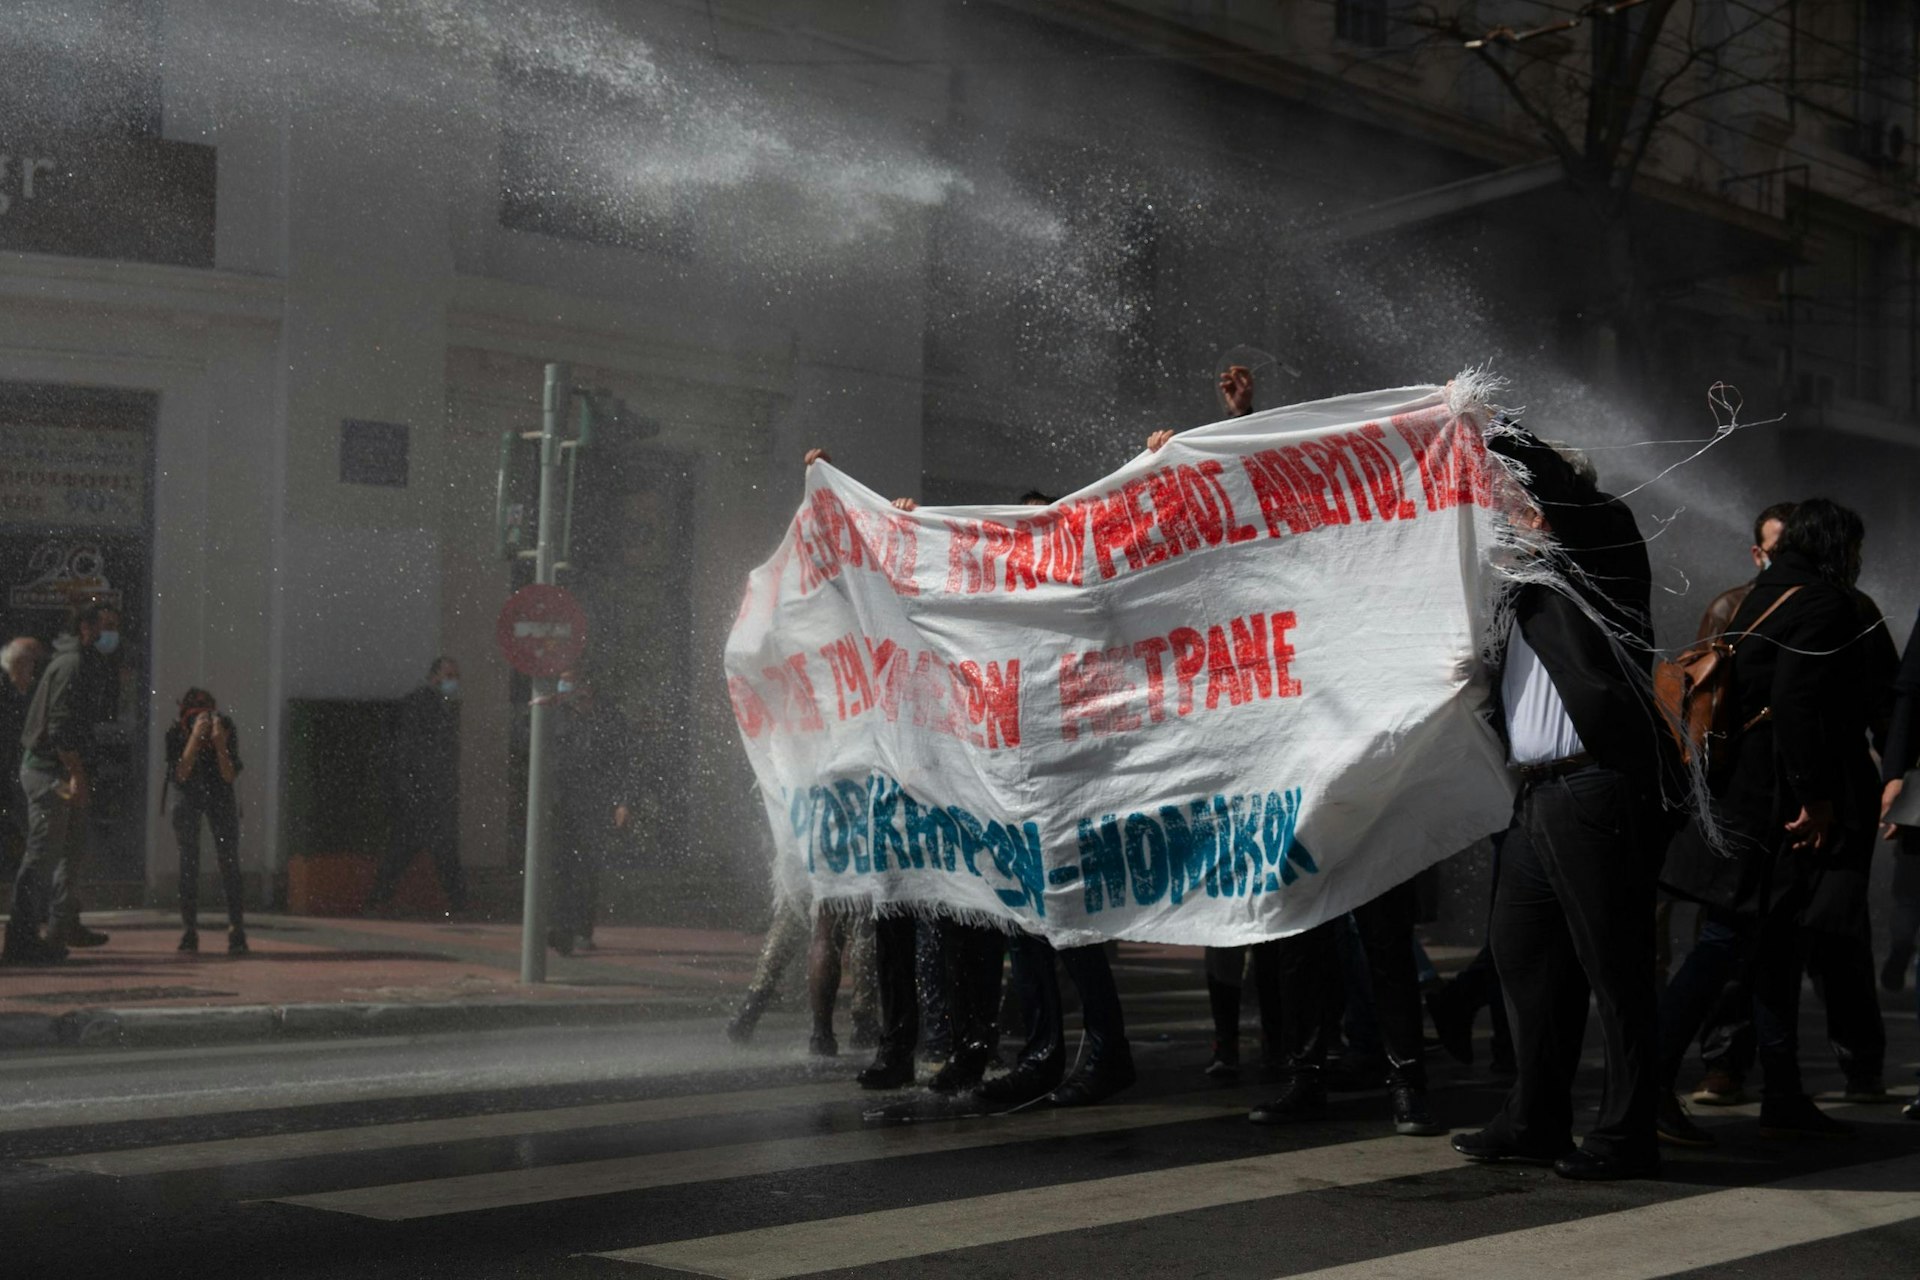 Athens is rising up against police brutality